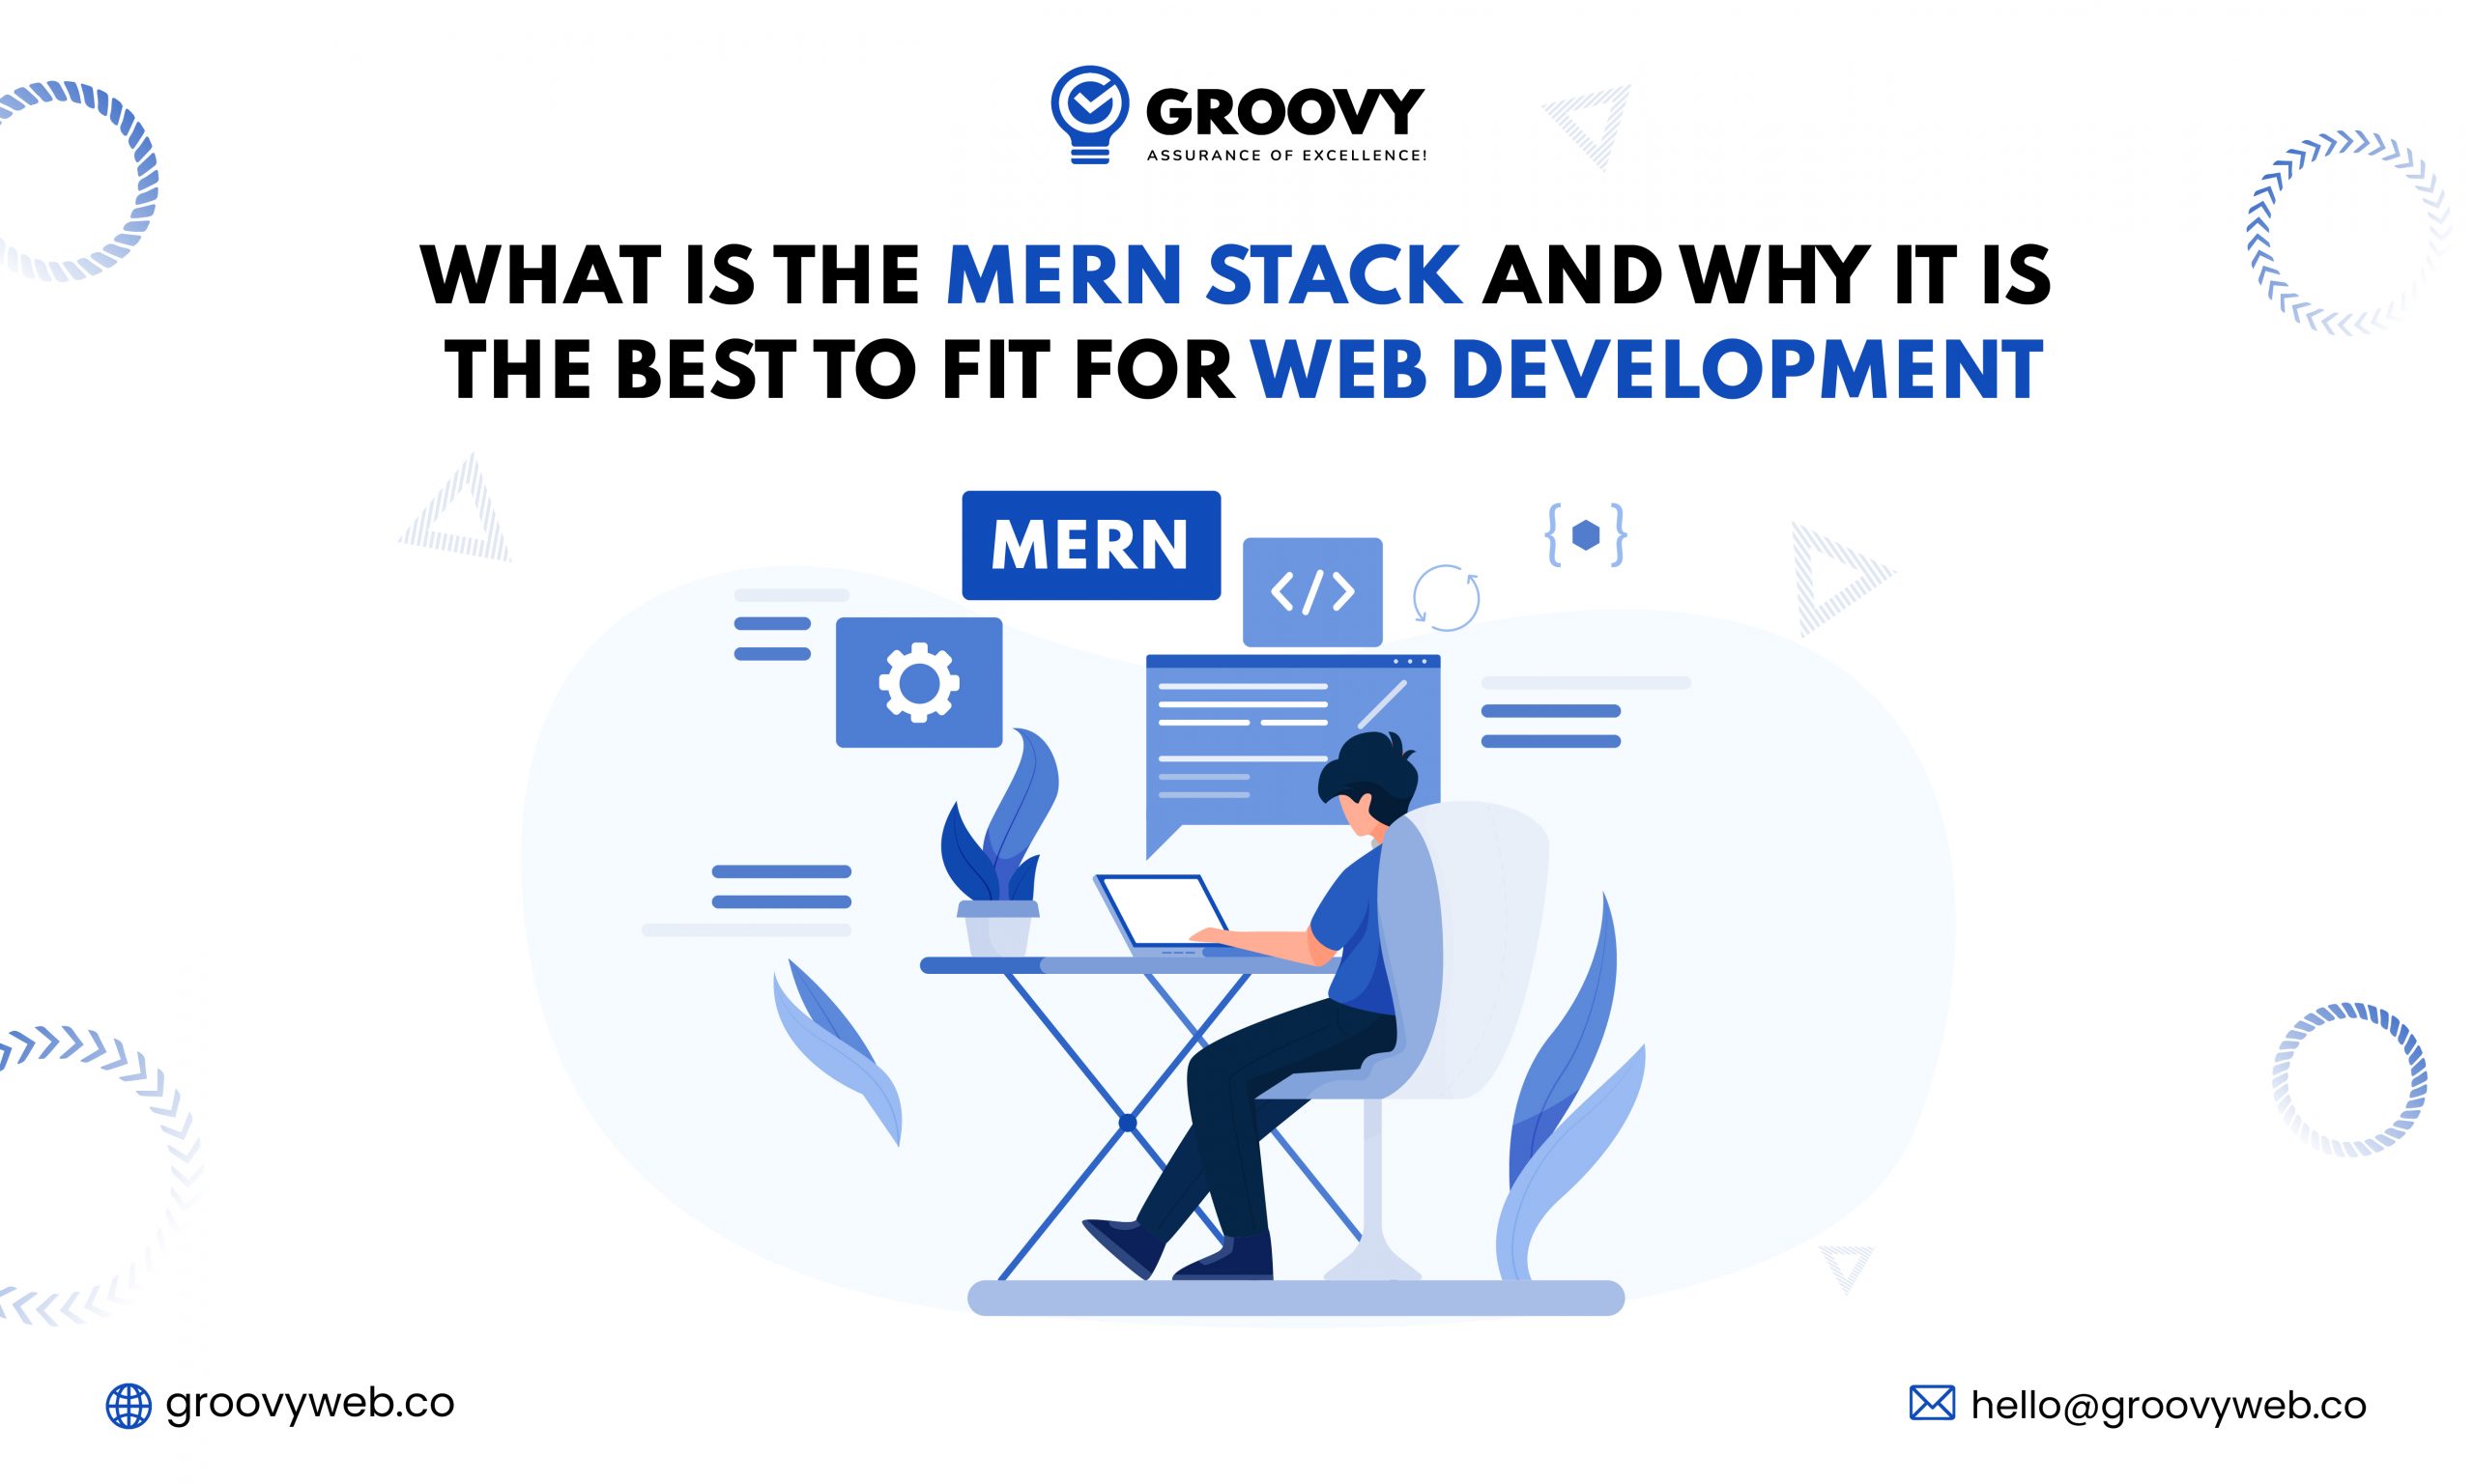 What Is The MERN Stack and Why It Is The Best to Fit for Web Development